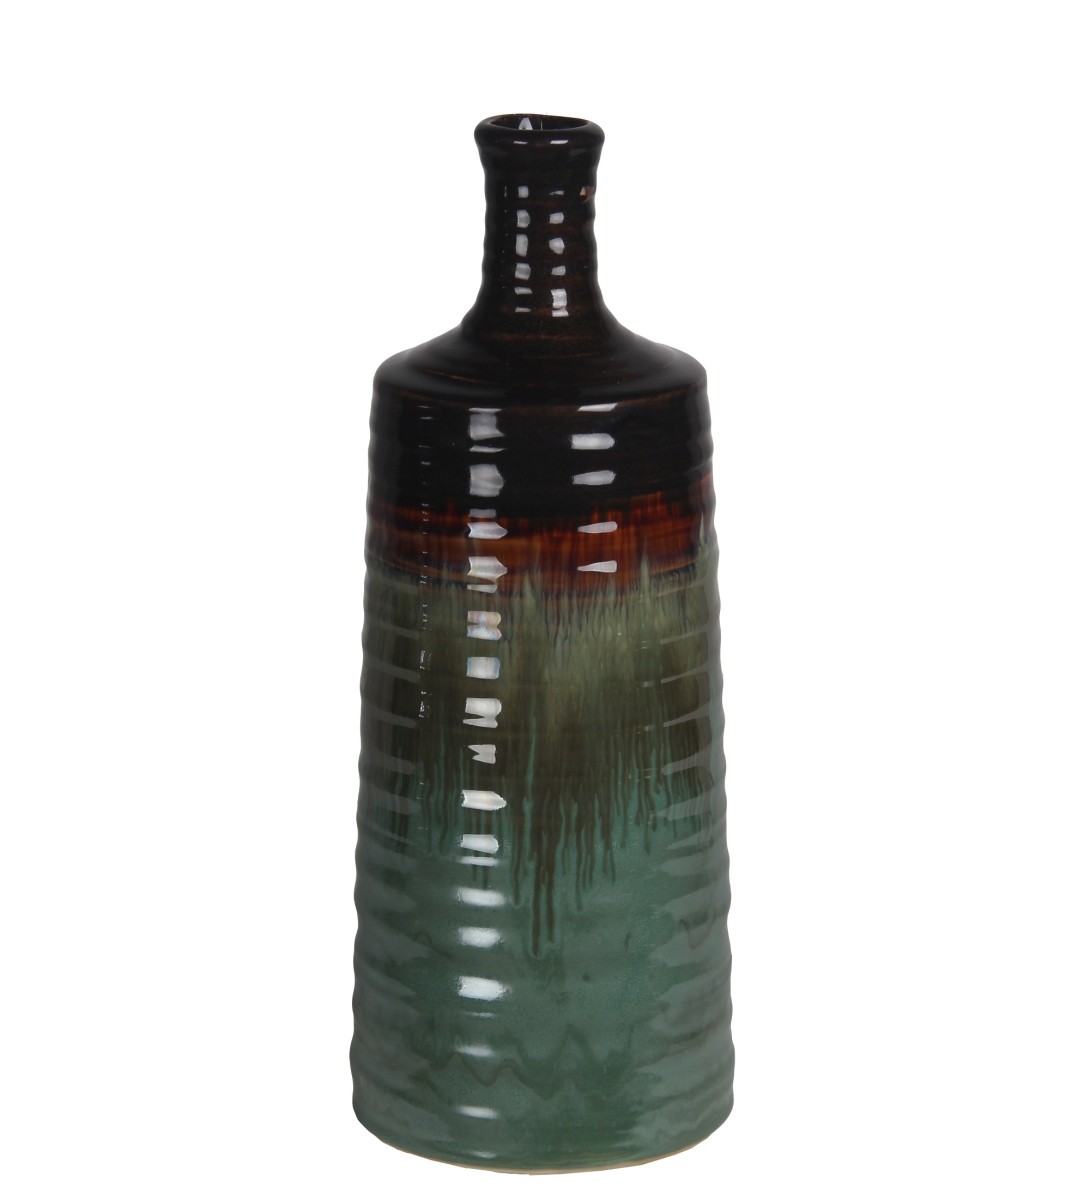 78207 5 X 5 X 13 In. Contemporary Ceramic Vase, Turquoise & Brown - Small